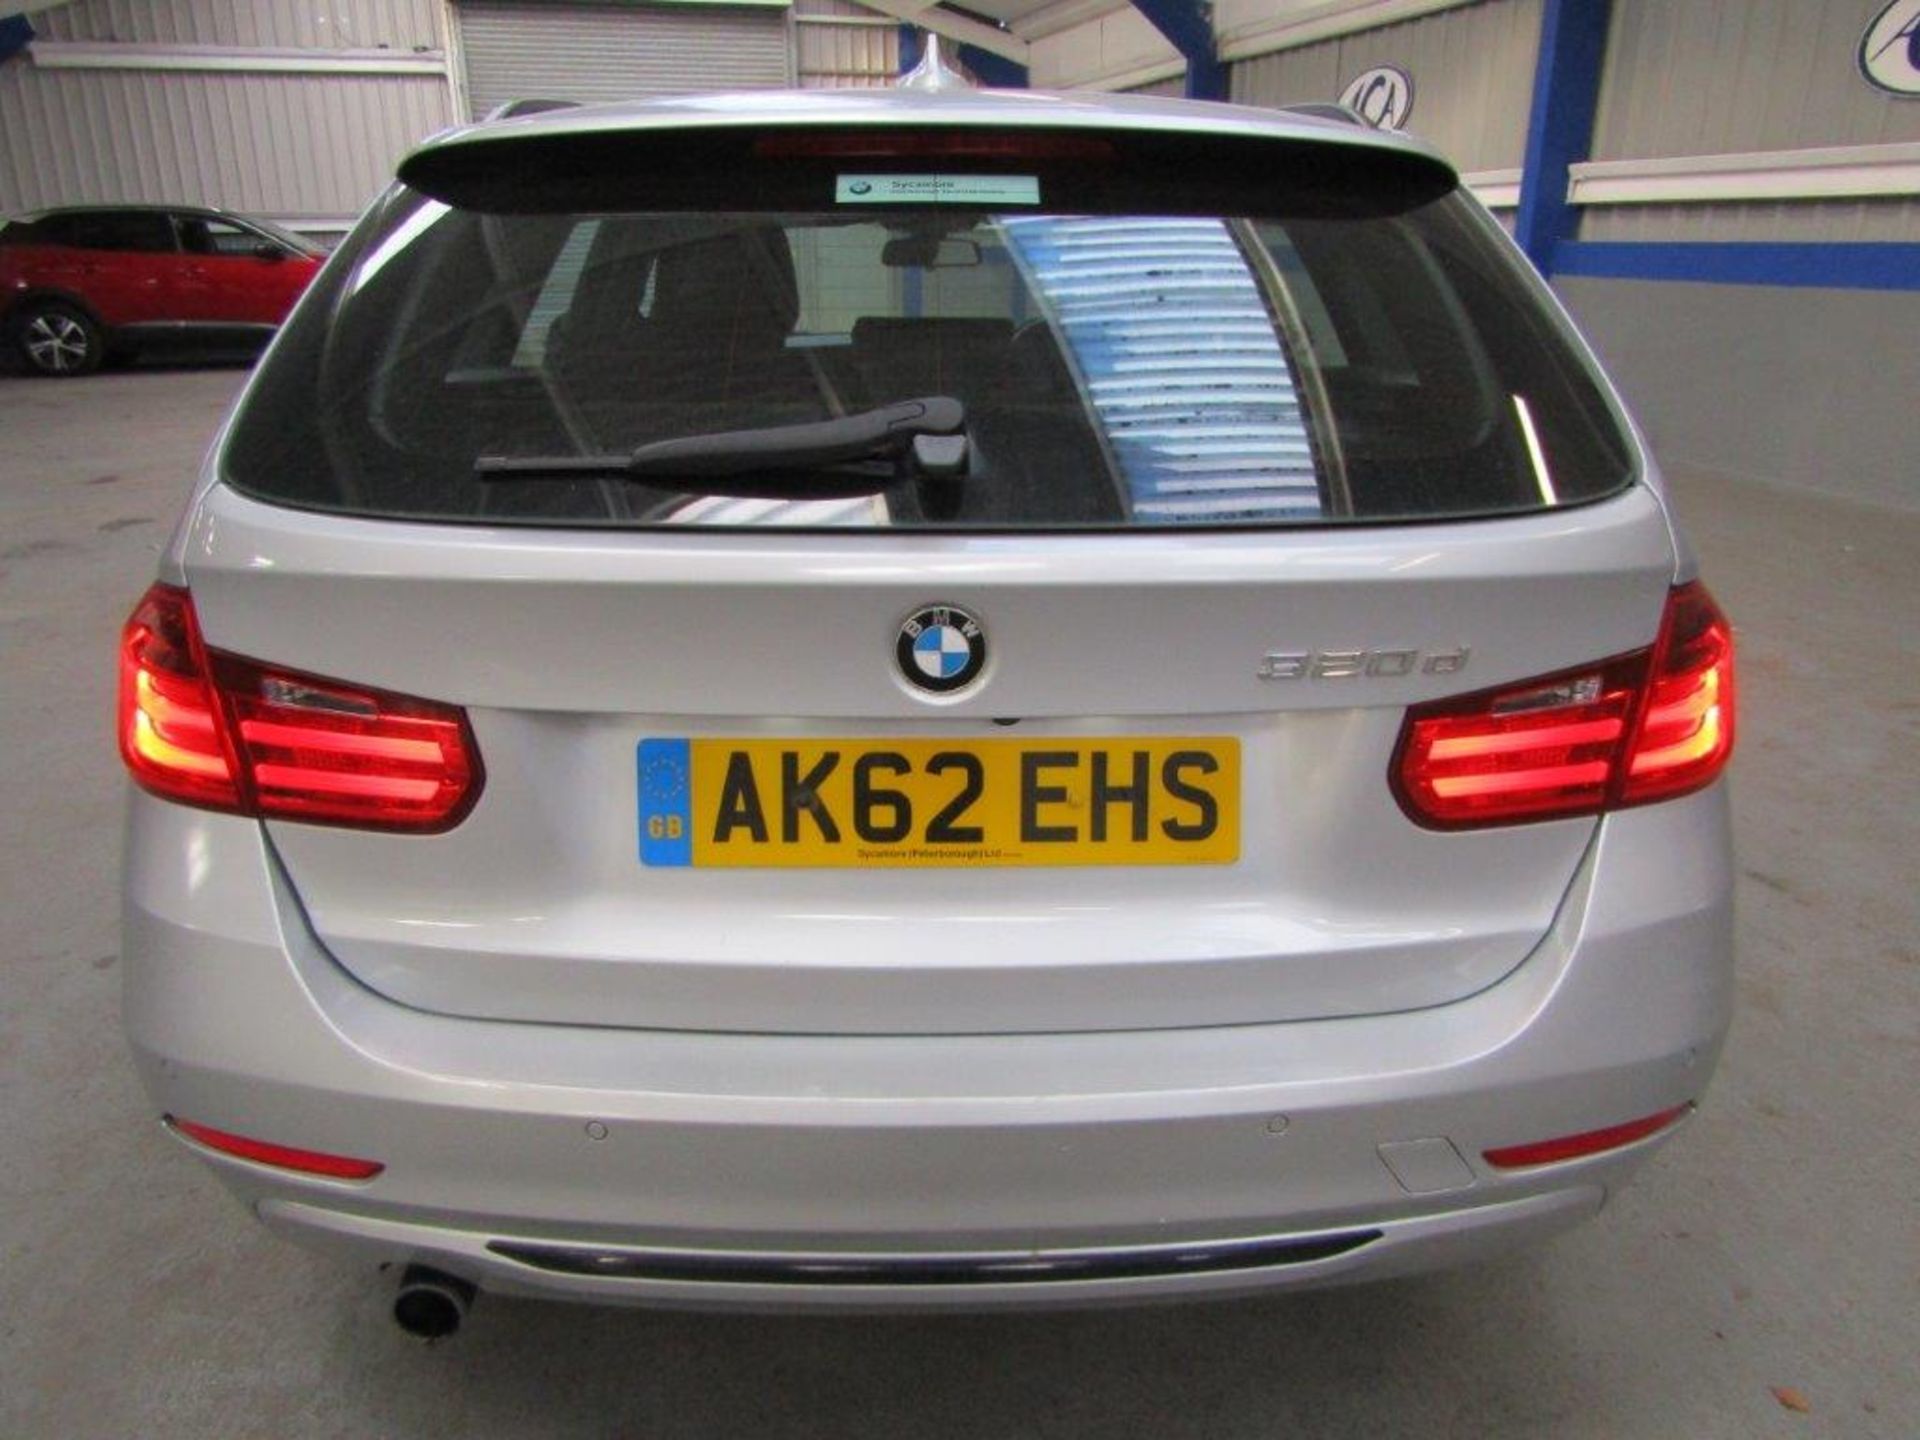 62 12 BMW 320D Sport Touring - Image 28 of 29